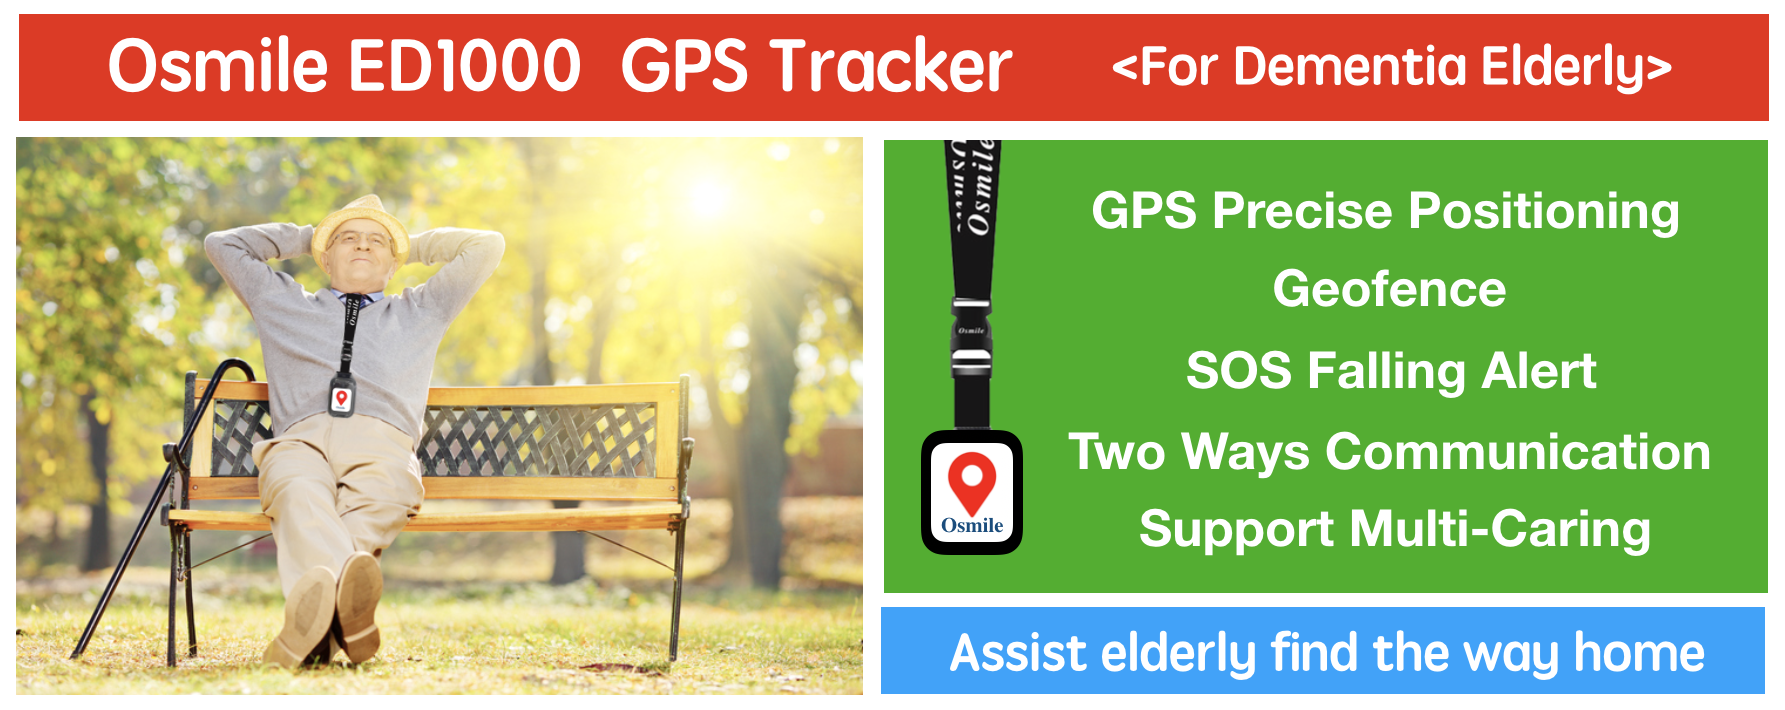 4G Smart Watch for Seniors SOS Wristband GPS Tracker, SOS Emergency Call,  GPS Location, Phone, Smart Watch for Android IOS Phones,Red : Amazon.se:  Electronics